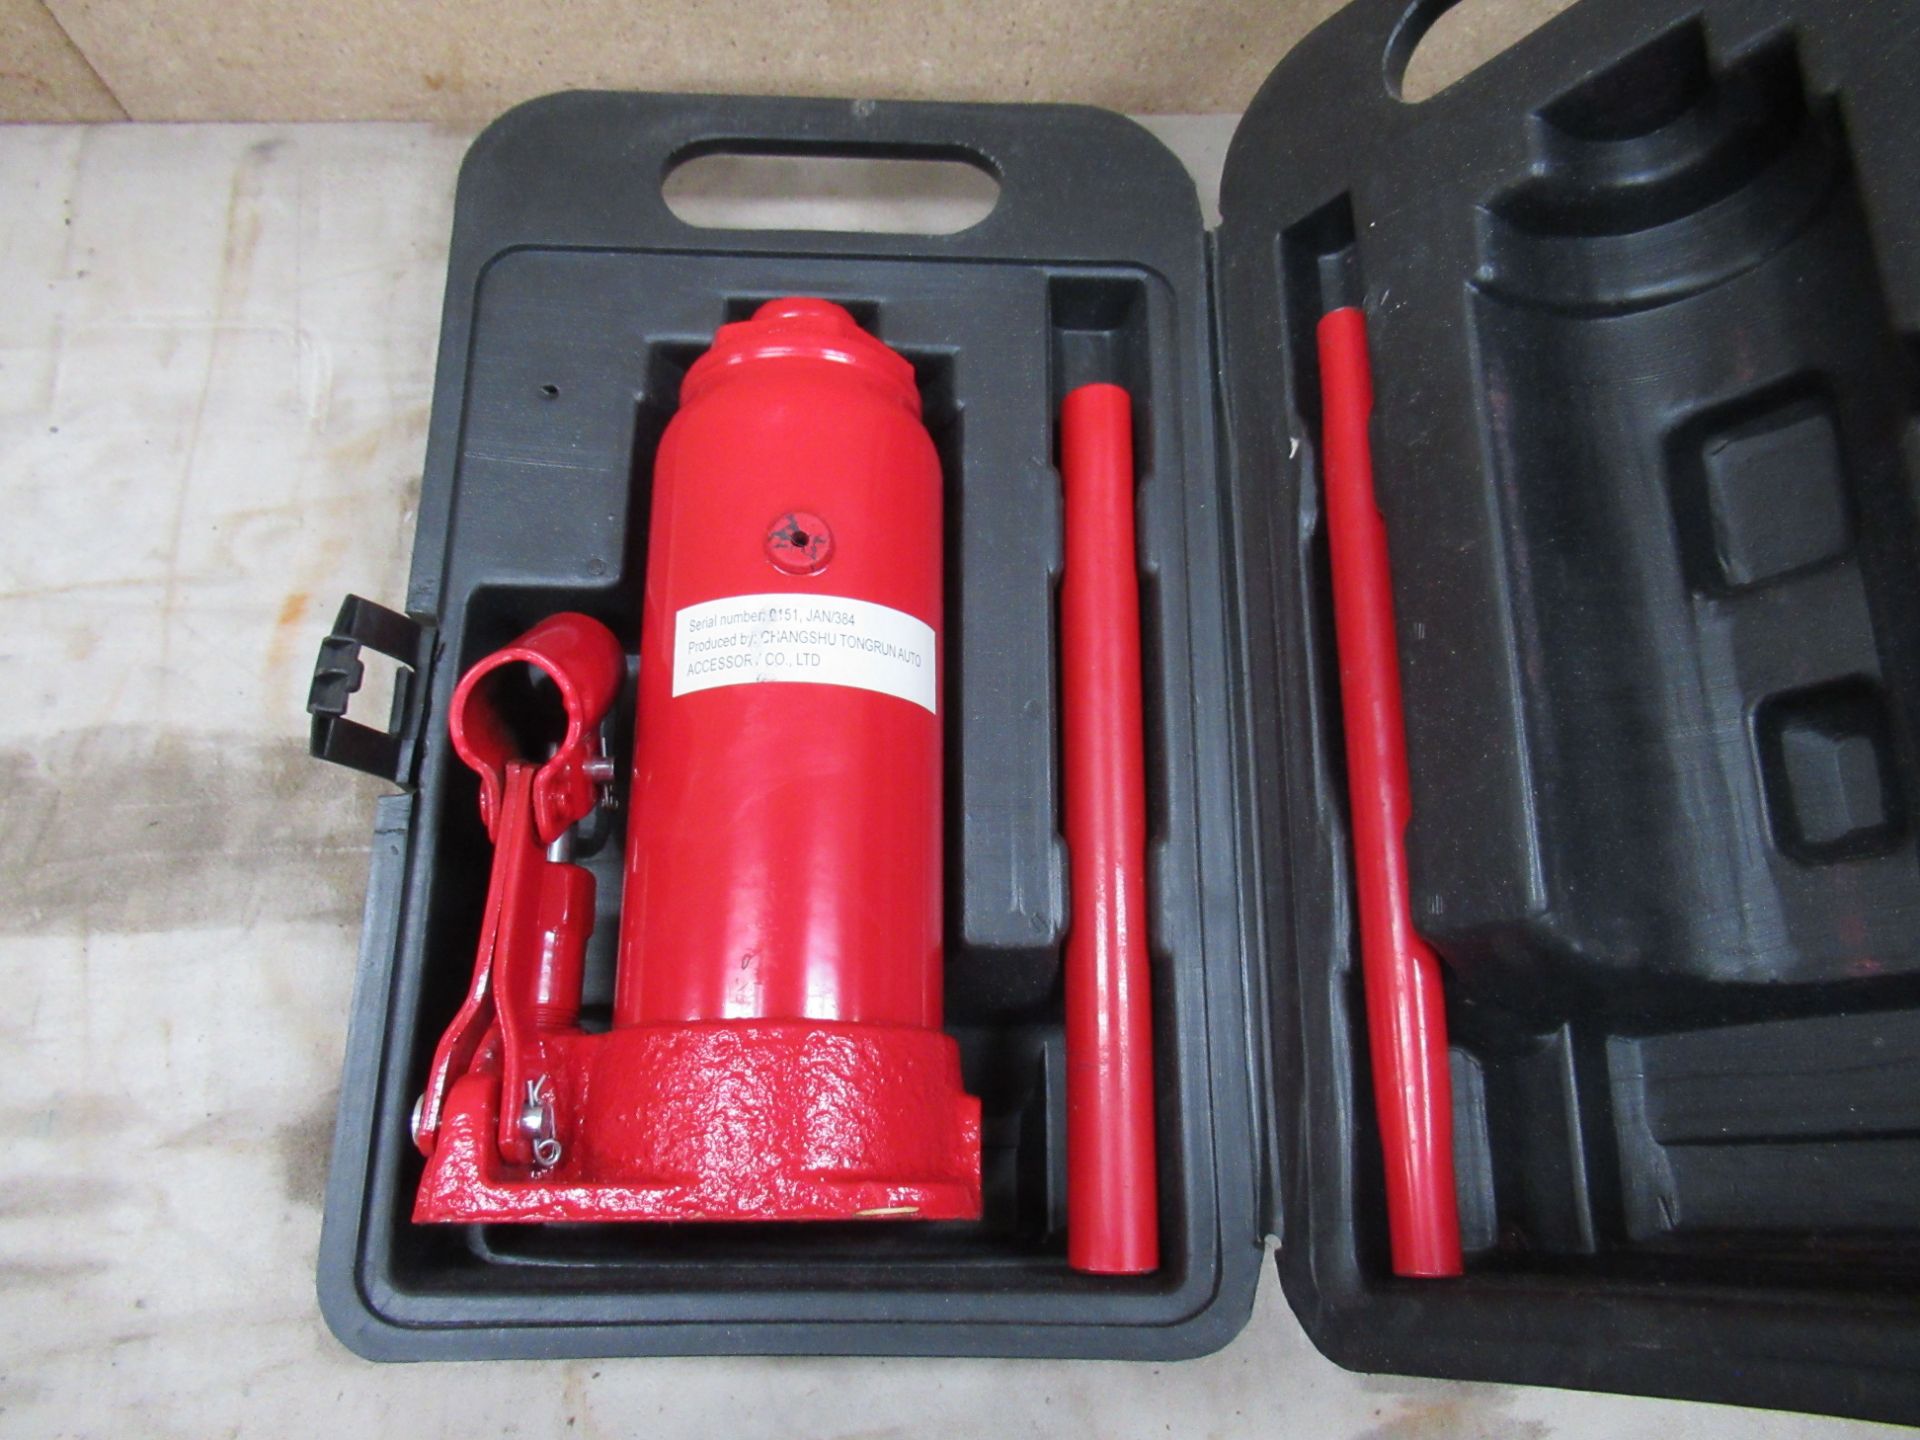 Hilka 5tonne Hydraulic Bottle Jack with a Streetwise 2tonne Hydraulic Jack (incomplete) - Image 5 of 5